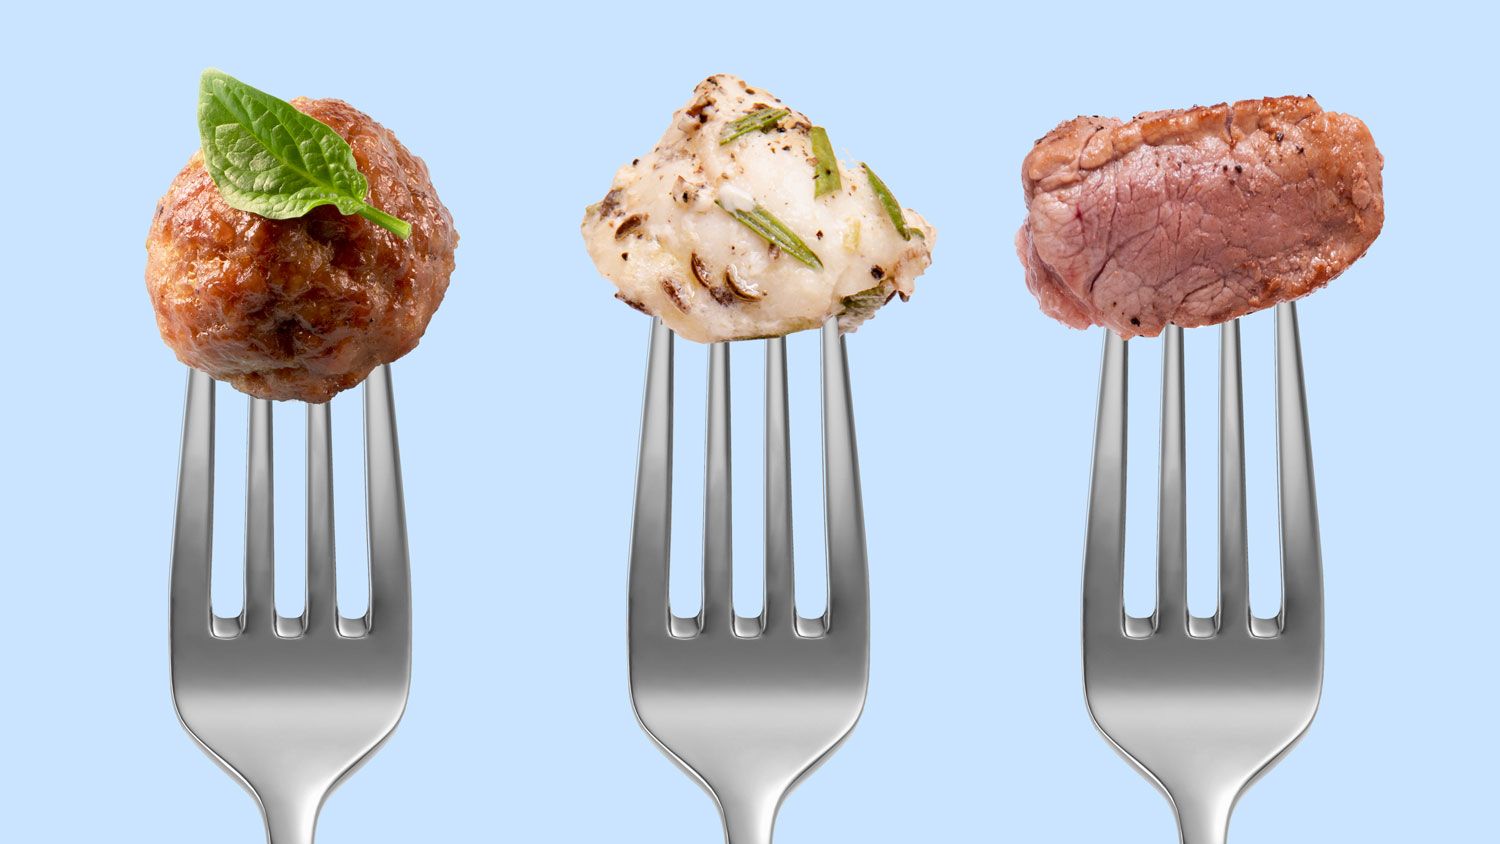 https://s41230.pcdn.co/wp-content/uploads/2021/08/what-is-cultured-meat.jpeg